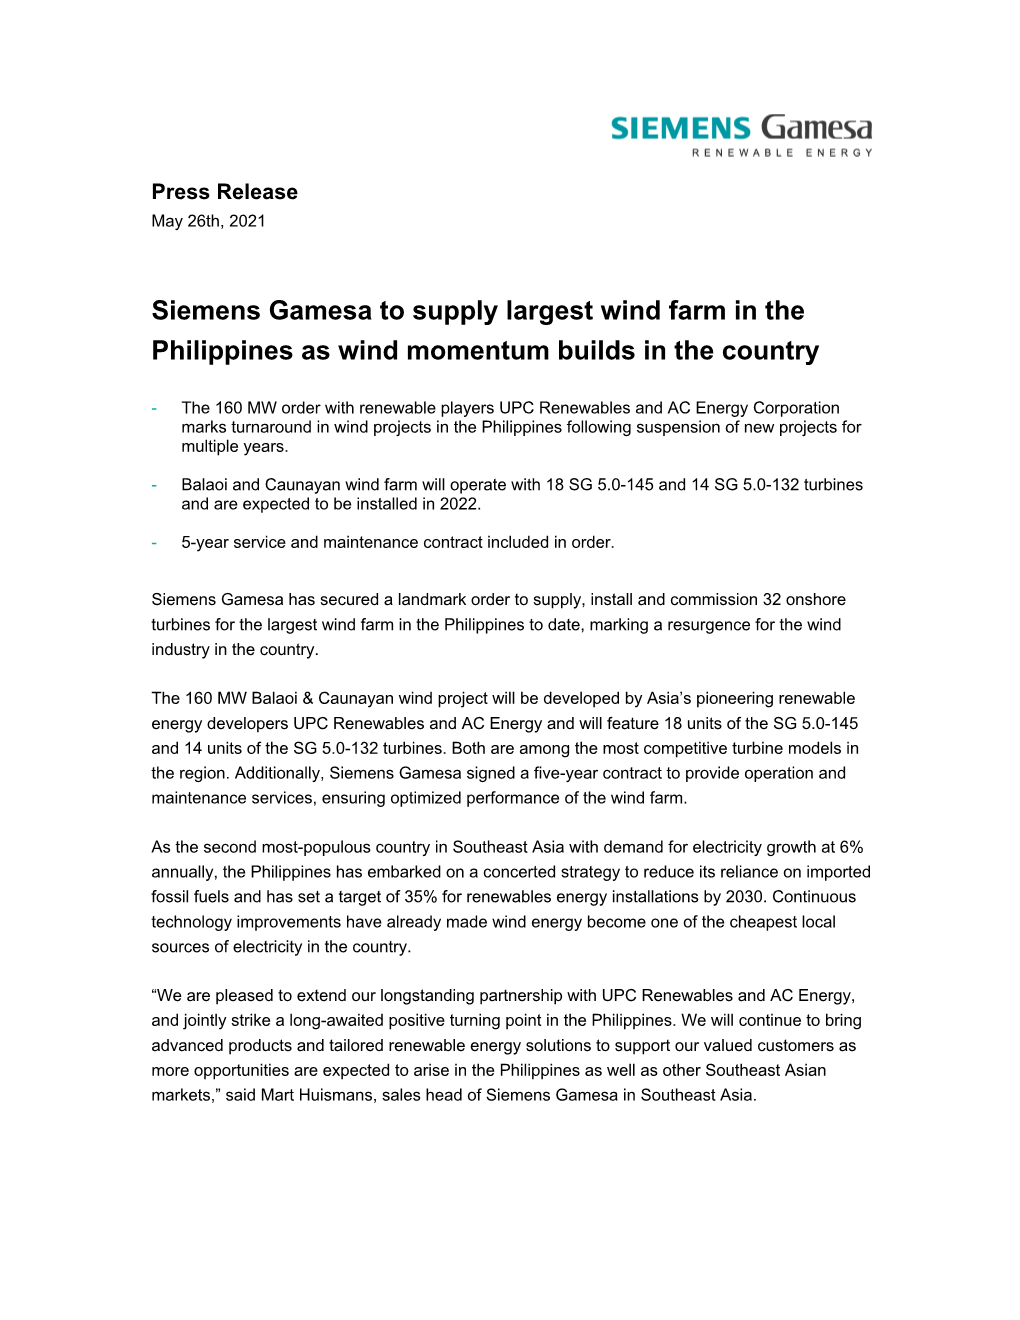 Siemens Gamesa to Supply Largest Wind Farm in the Philippines As Wind Momentum Builds in the Country